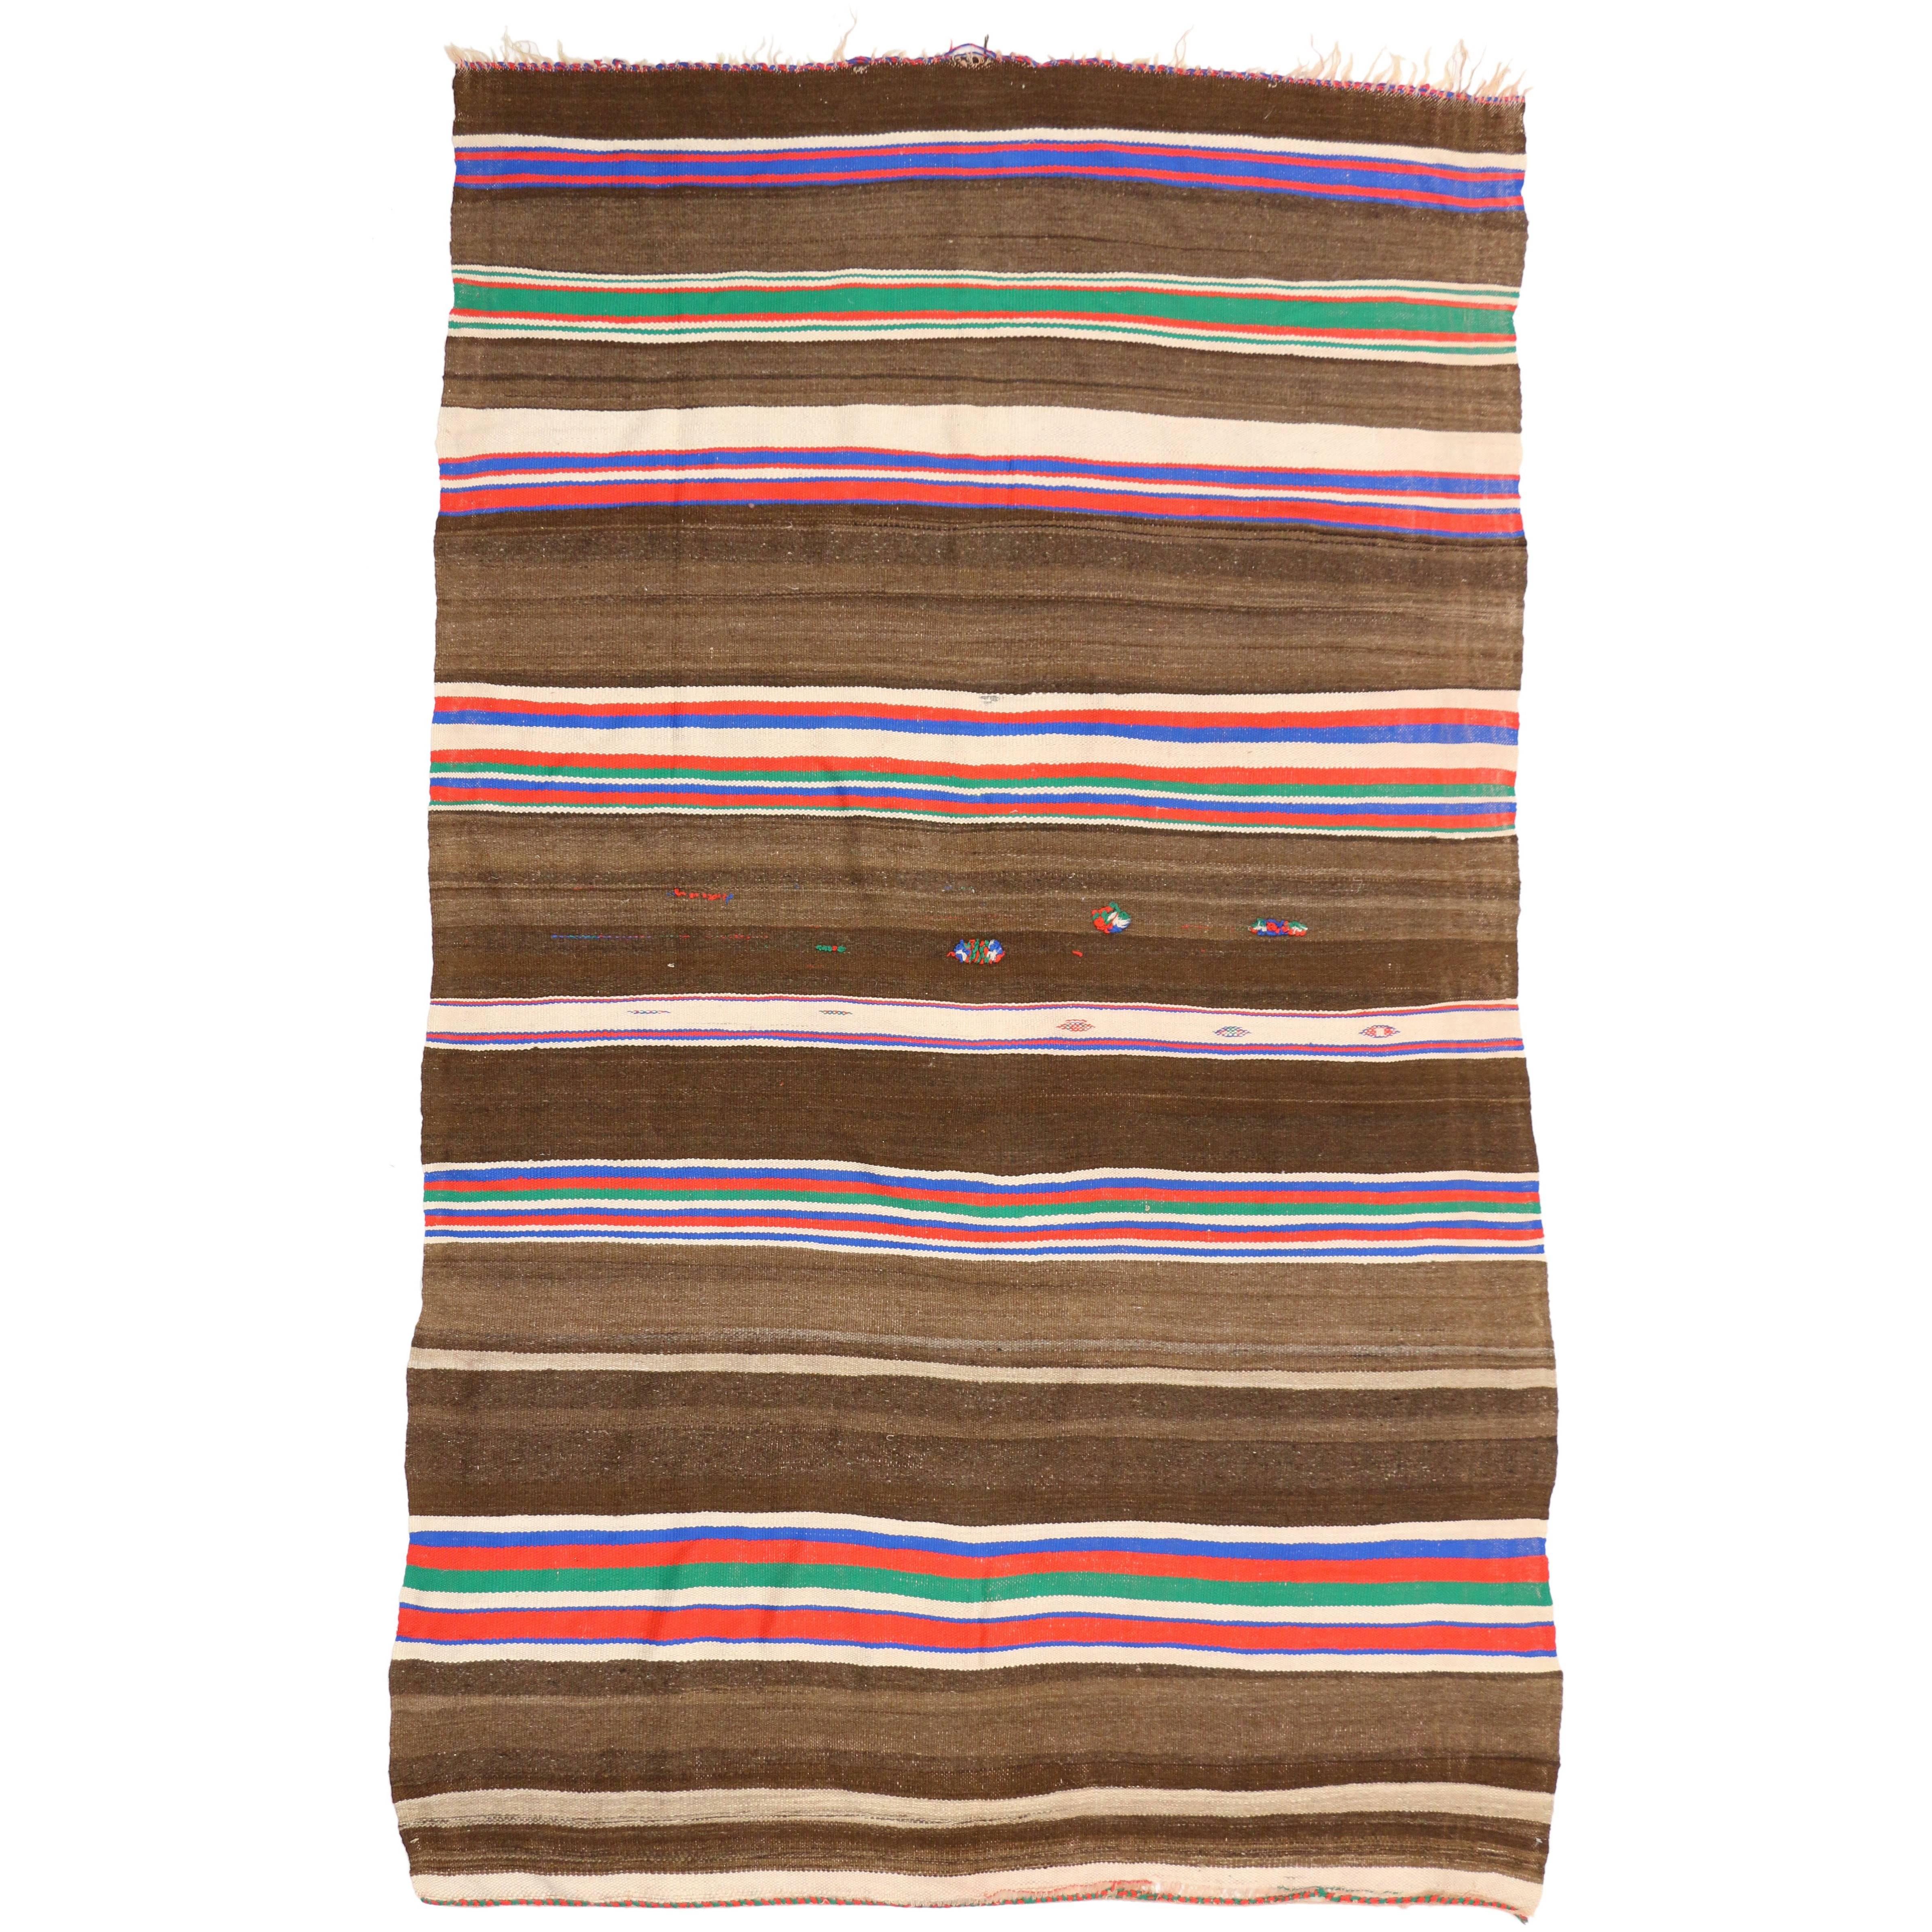 Vintage Berber Striped Moroccan Kilim Rug with Tribal Style